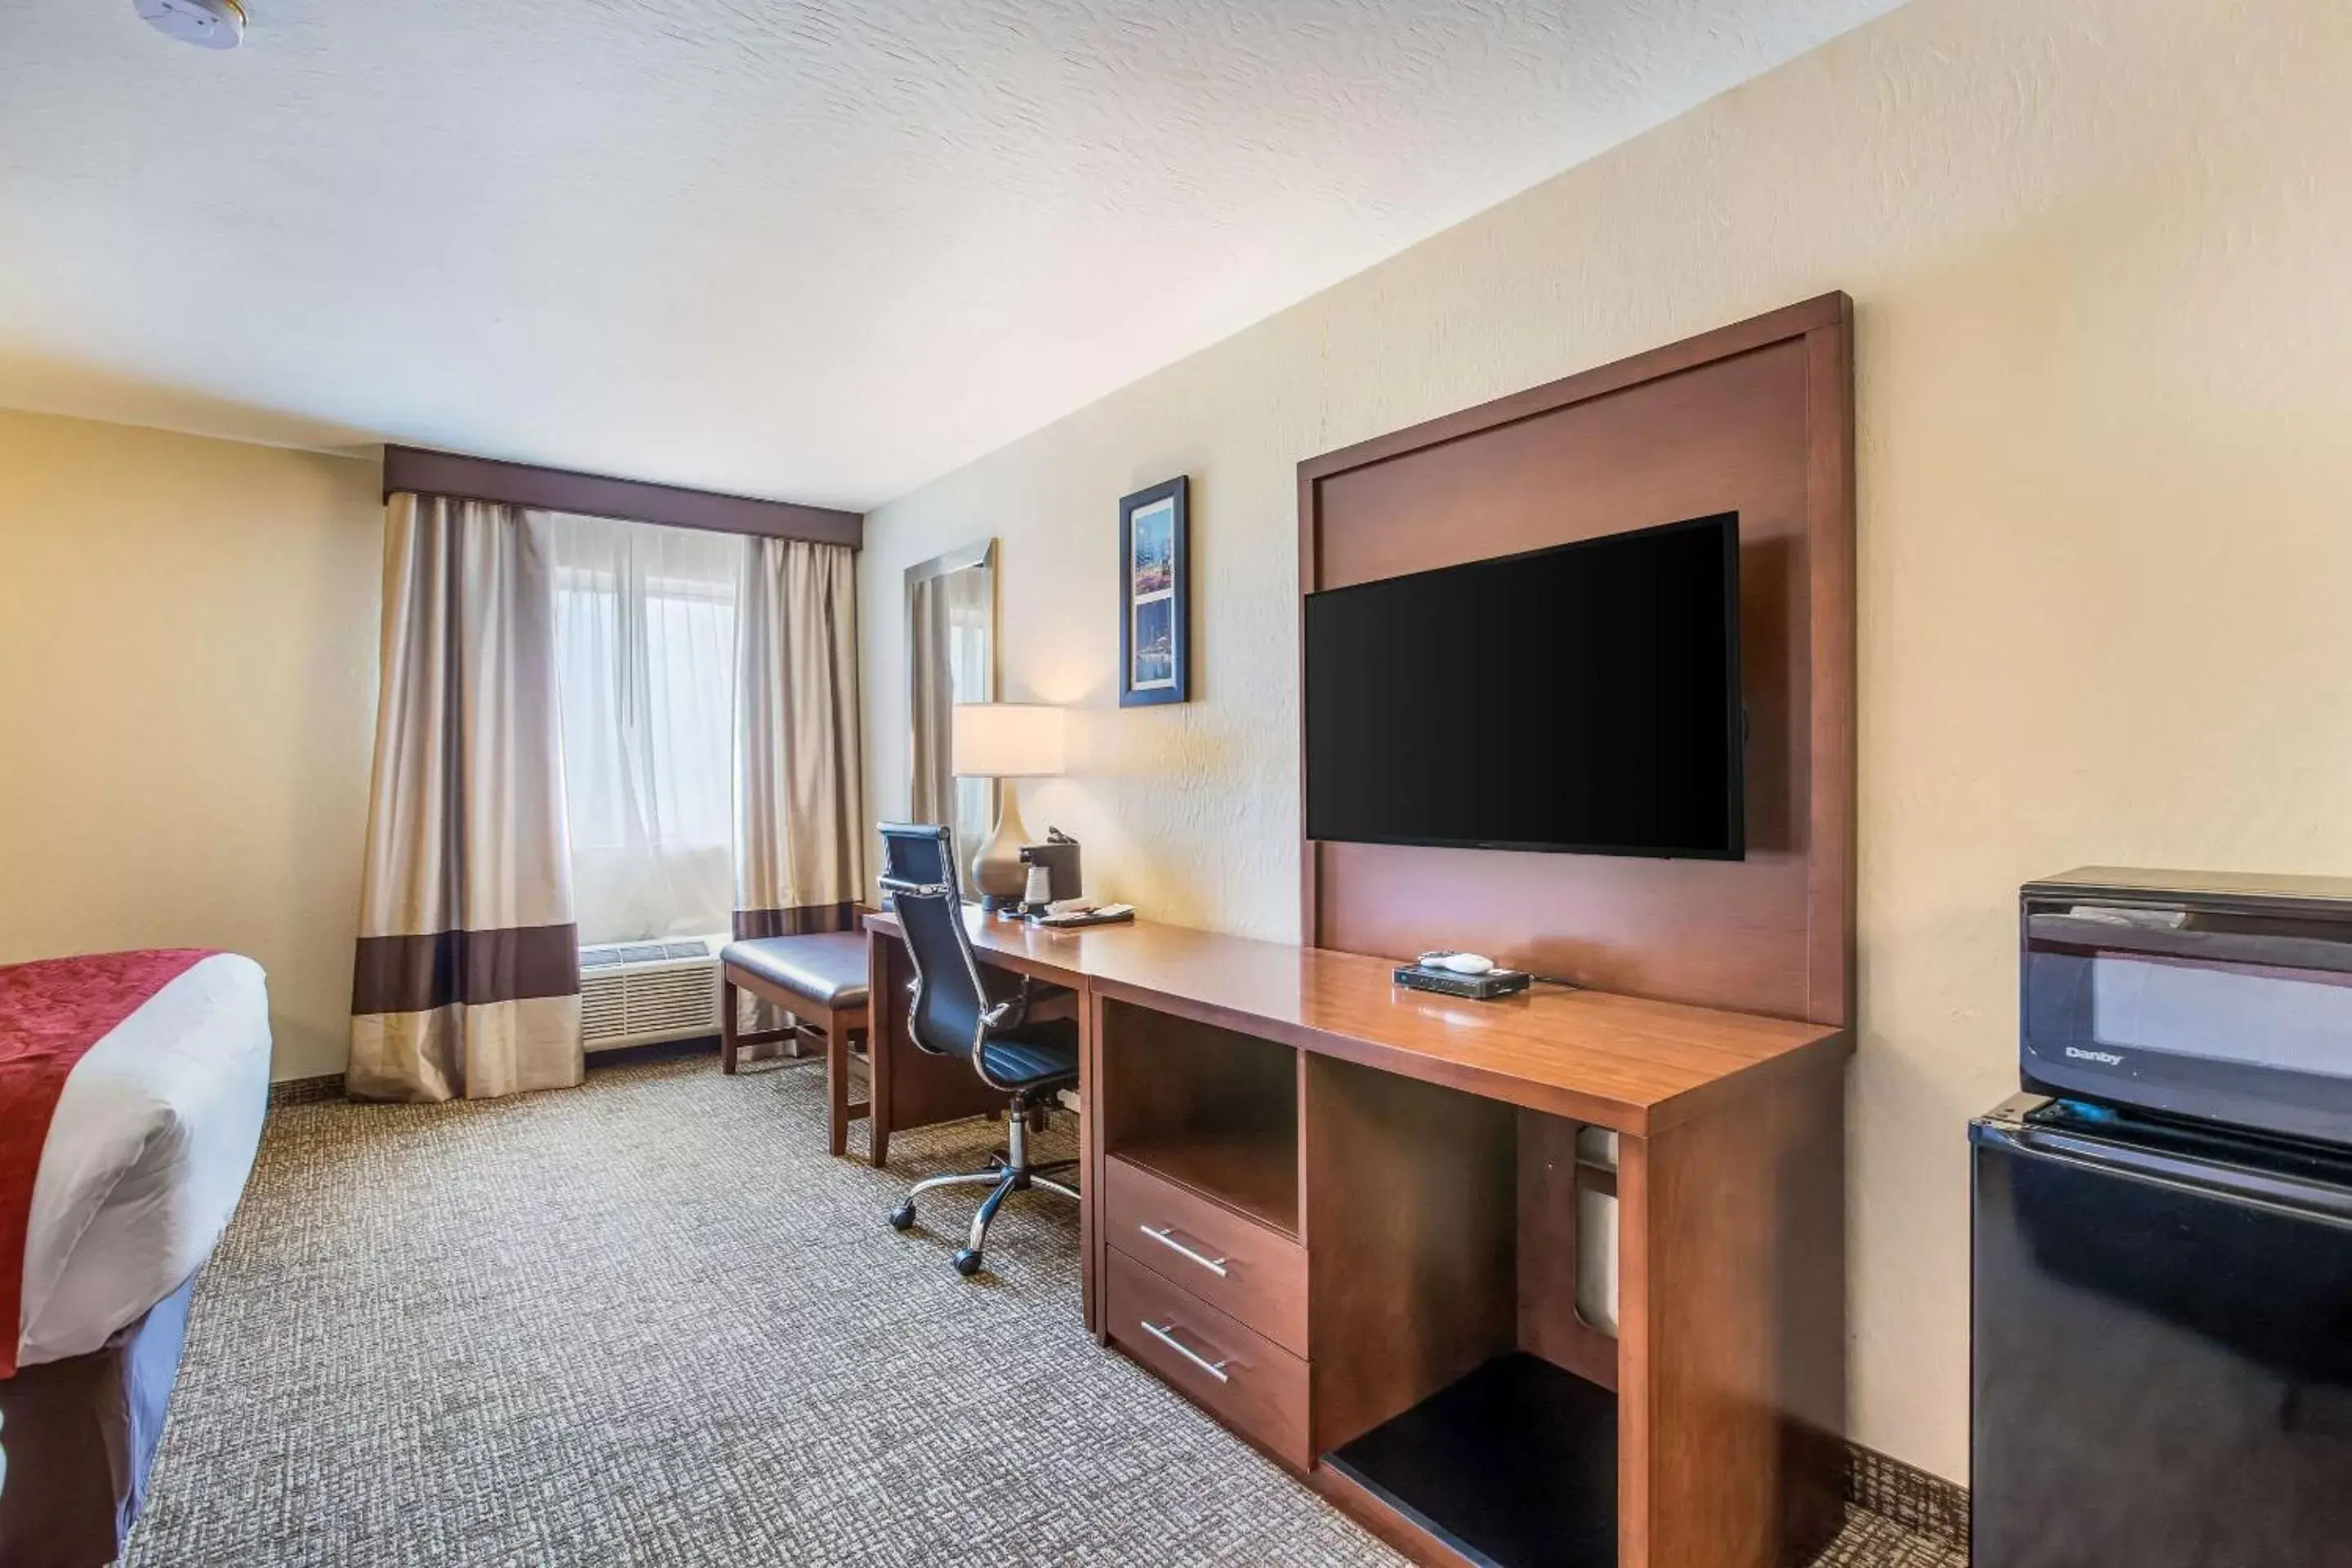 Bedroom, TV/Entertainment Center in Comfort Inn & Suites Fairborn near Wright Patterson AFB